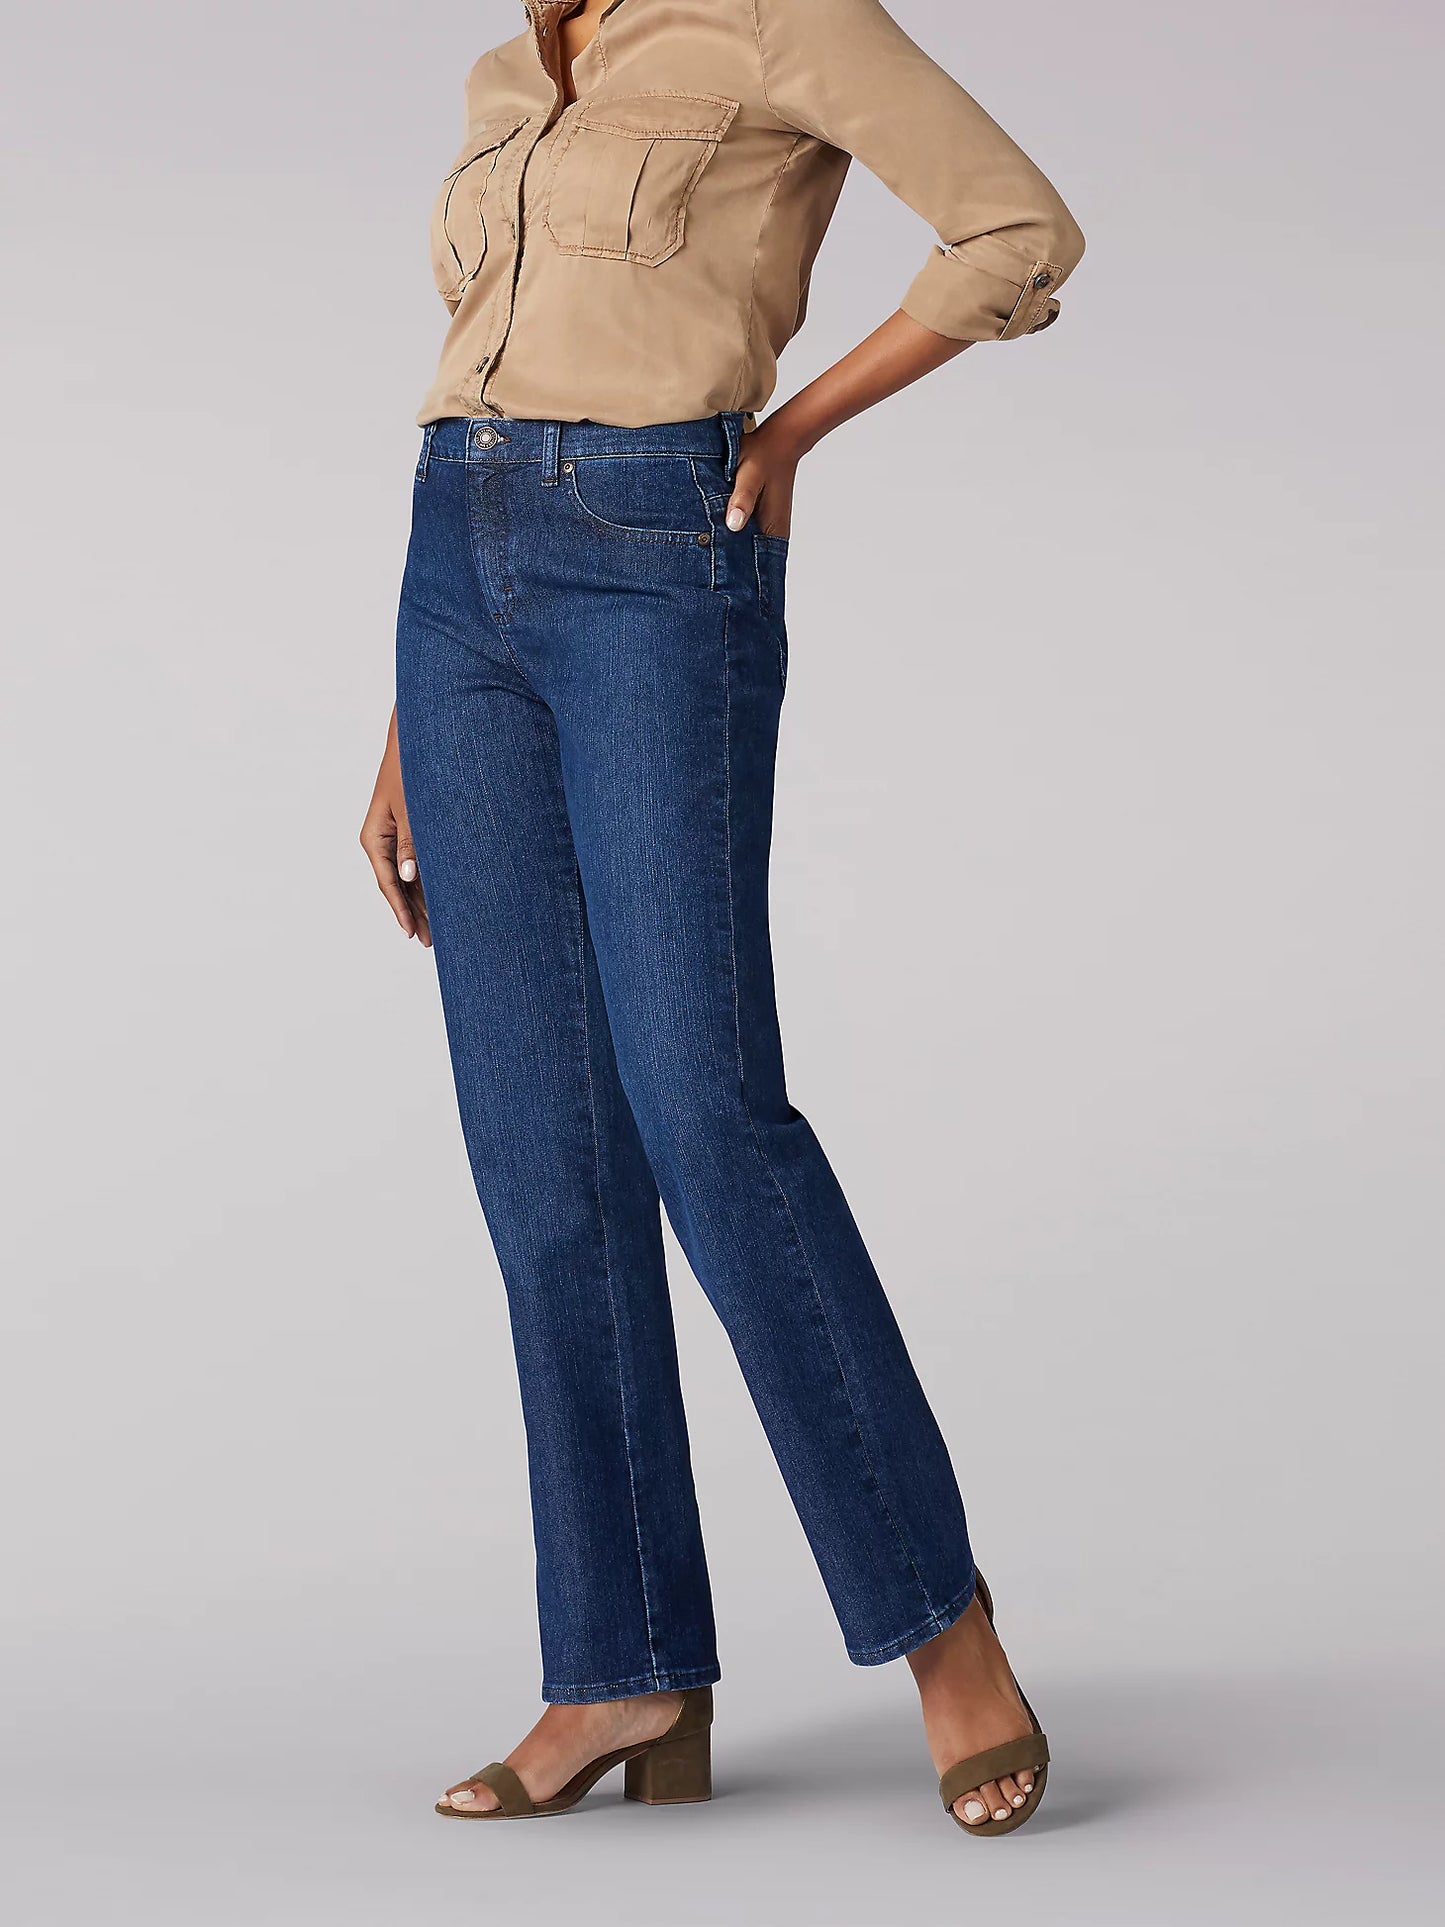 Women's Lee Relaxed Fit Straight Leg Jean - Petite